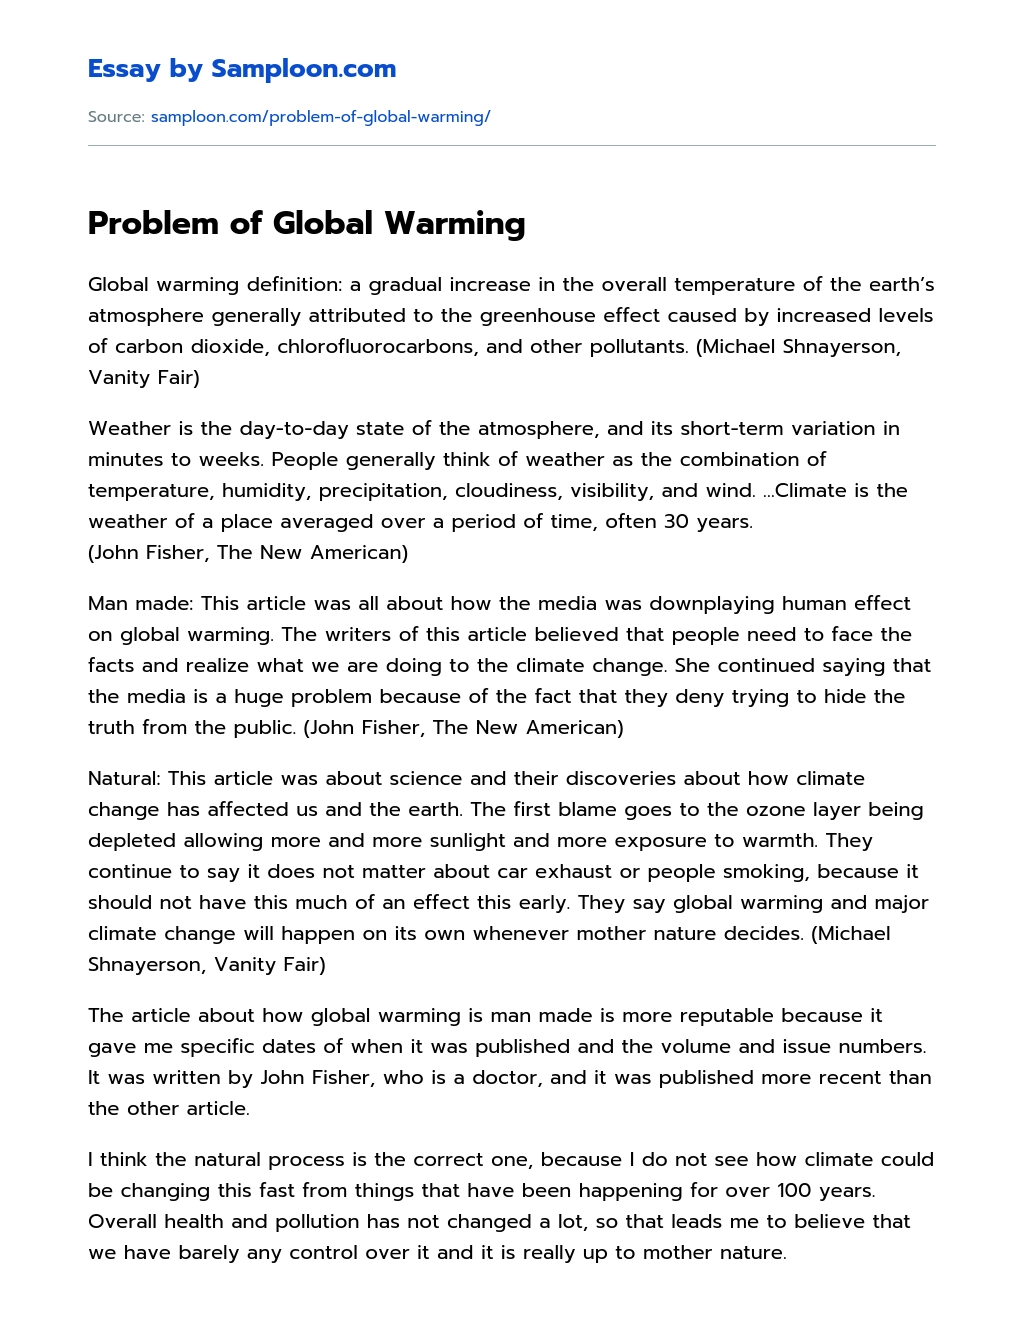 an essay about global warming and climate change